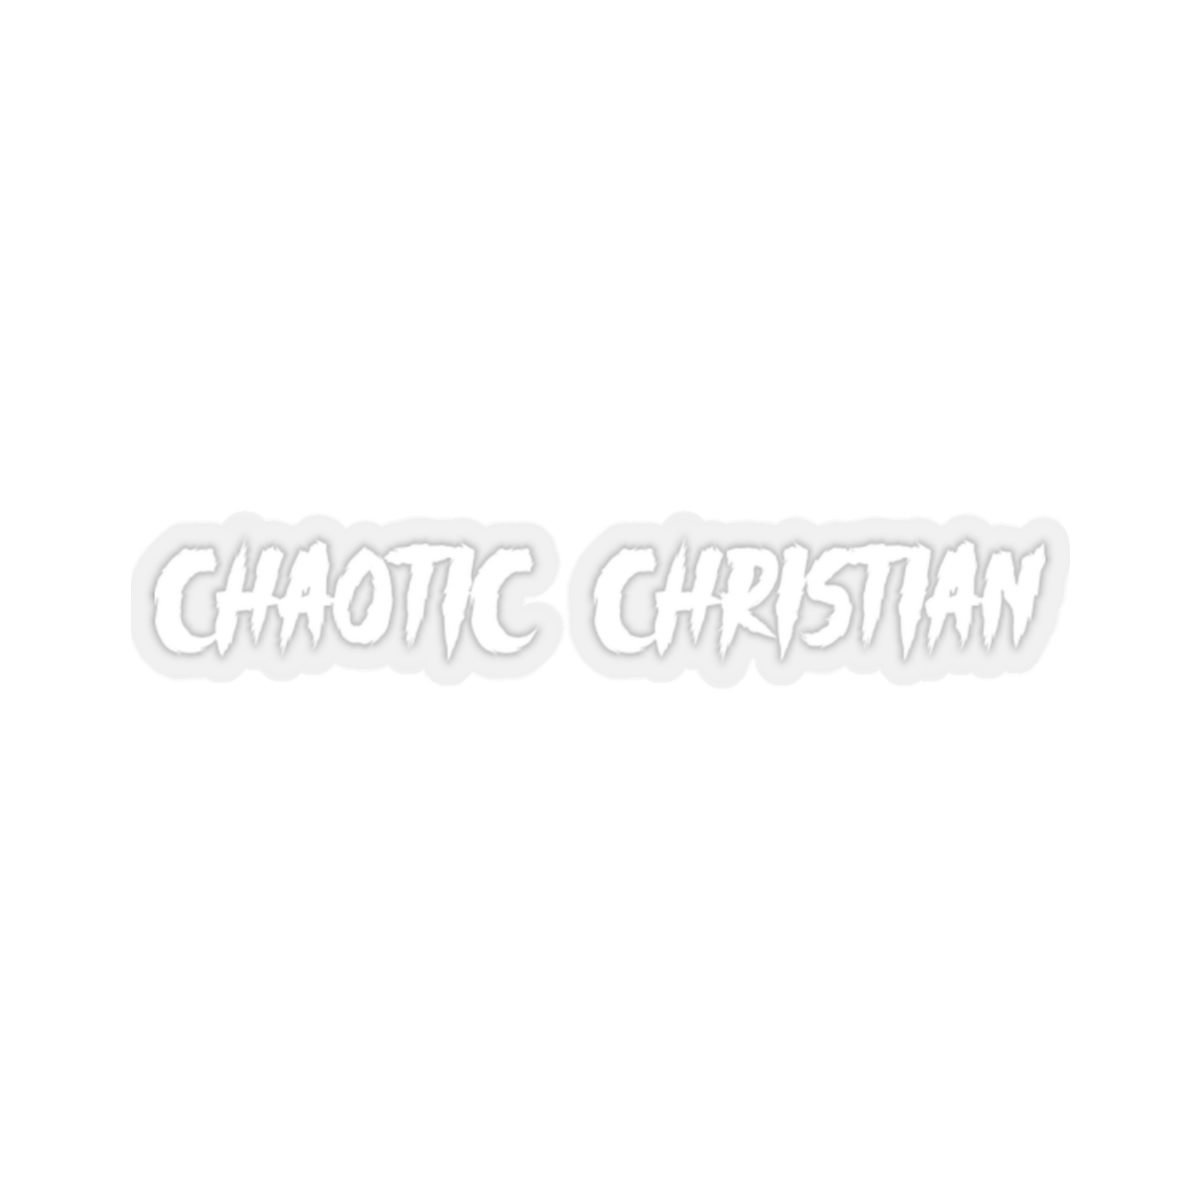 The Chaotic Christian Logo Die Cut Stickers